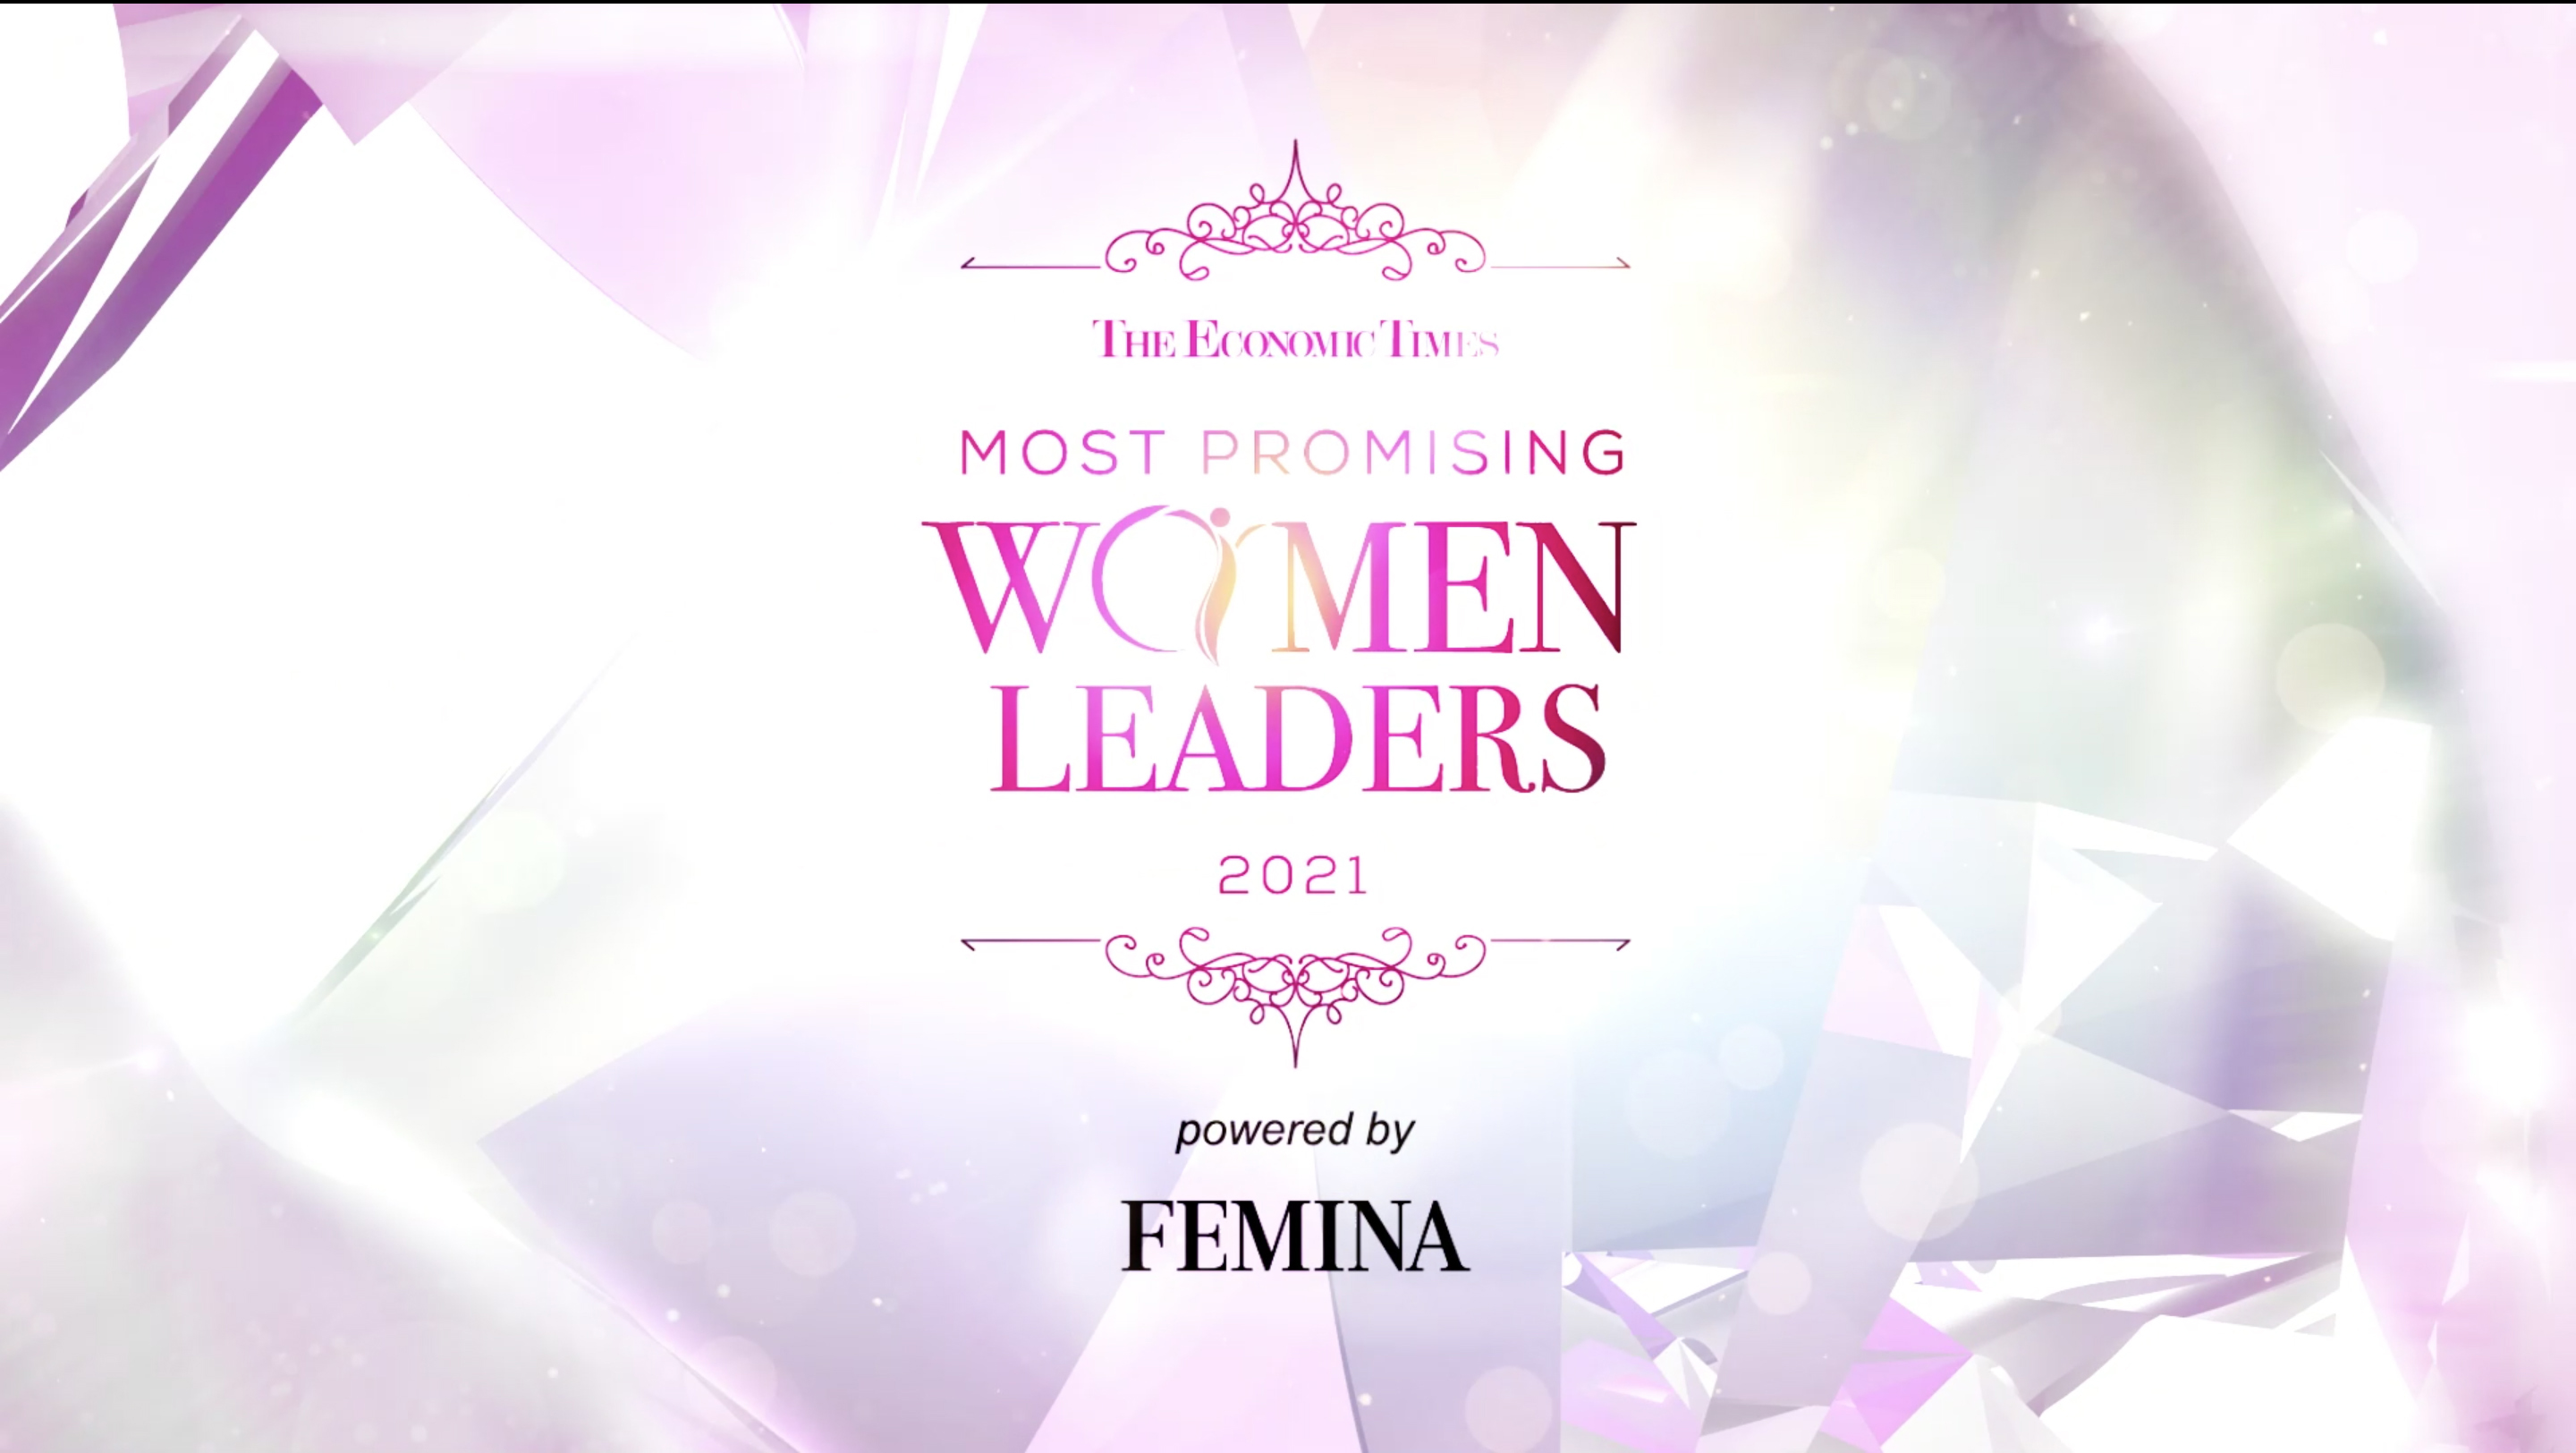 The Economic Times MOST PROMISING WOMEN LEADERS 2021 by FEMINA Neha Lal Founder & CEO Shrofile Technologies